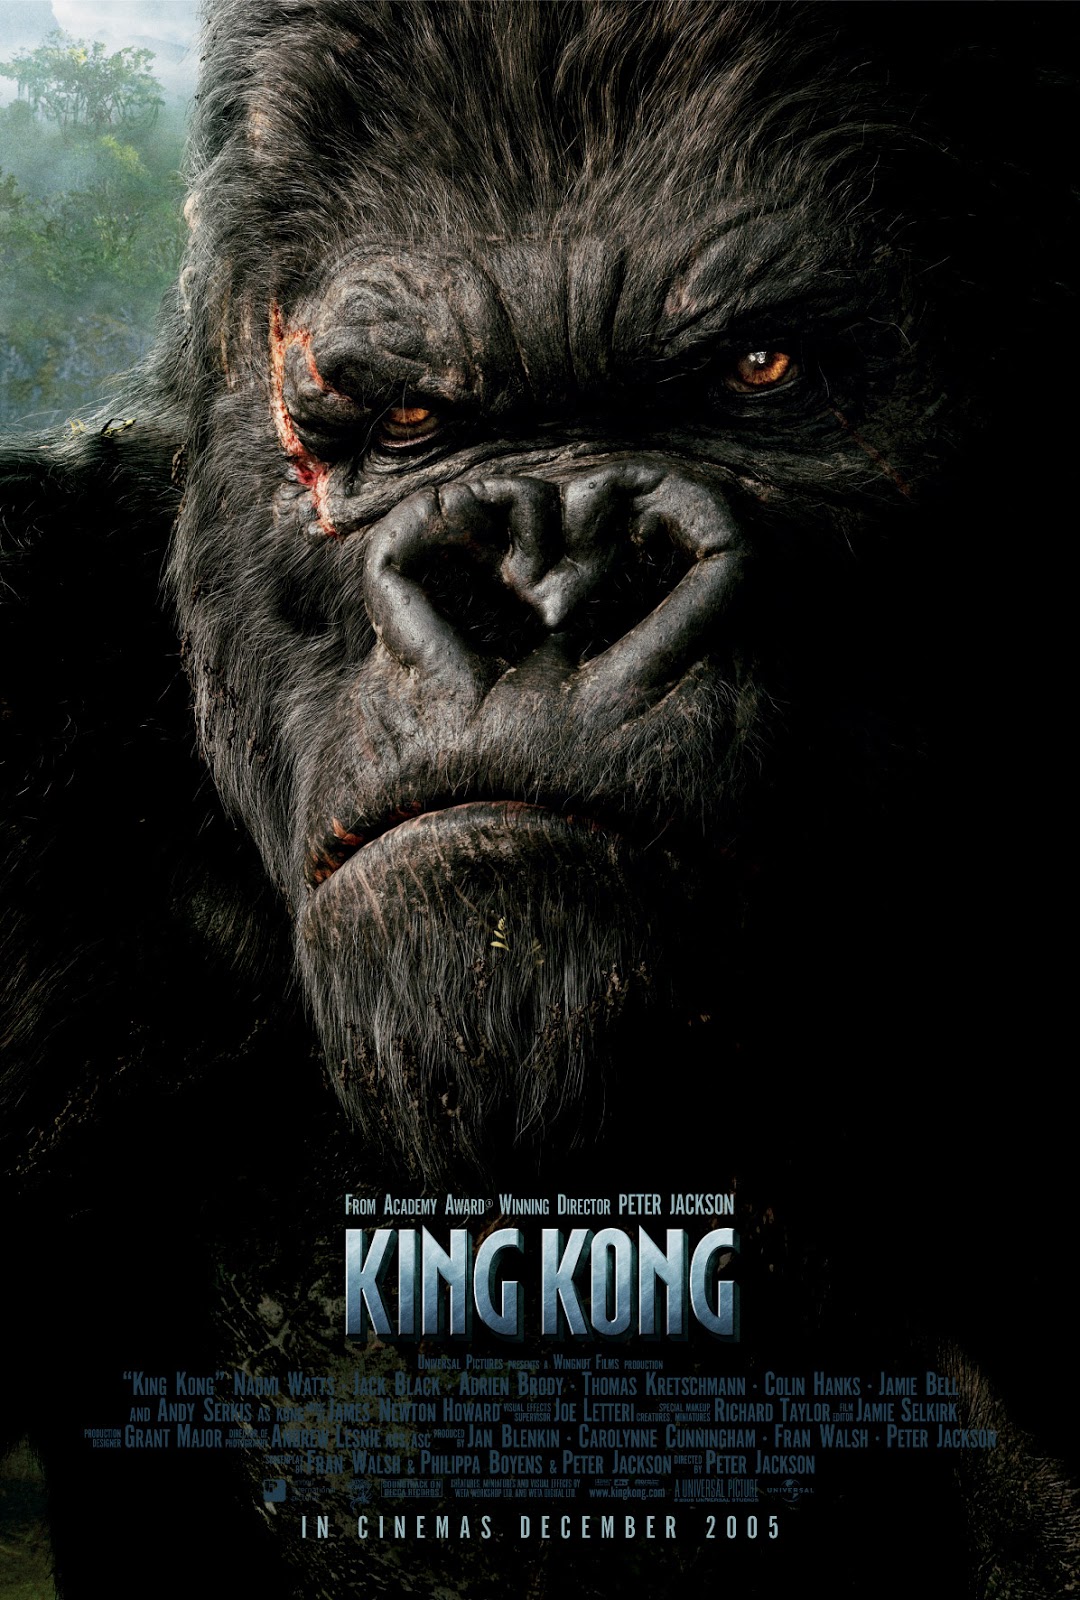 Movie Review: "King Kong" (2005) | Lolo Loves Films